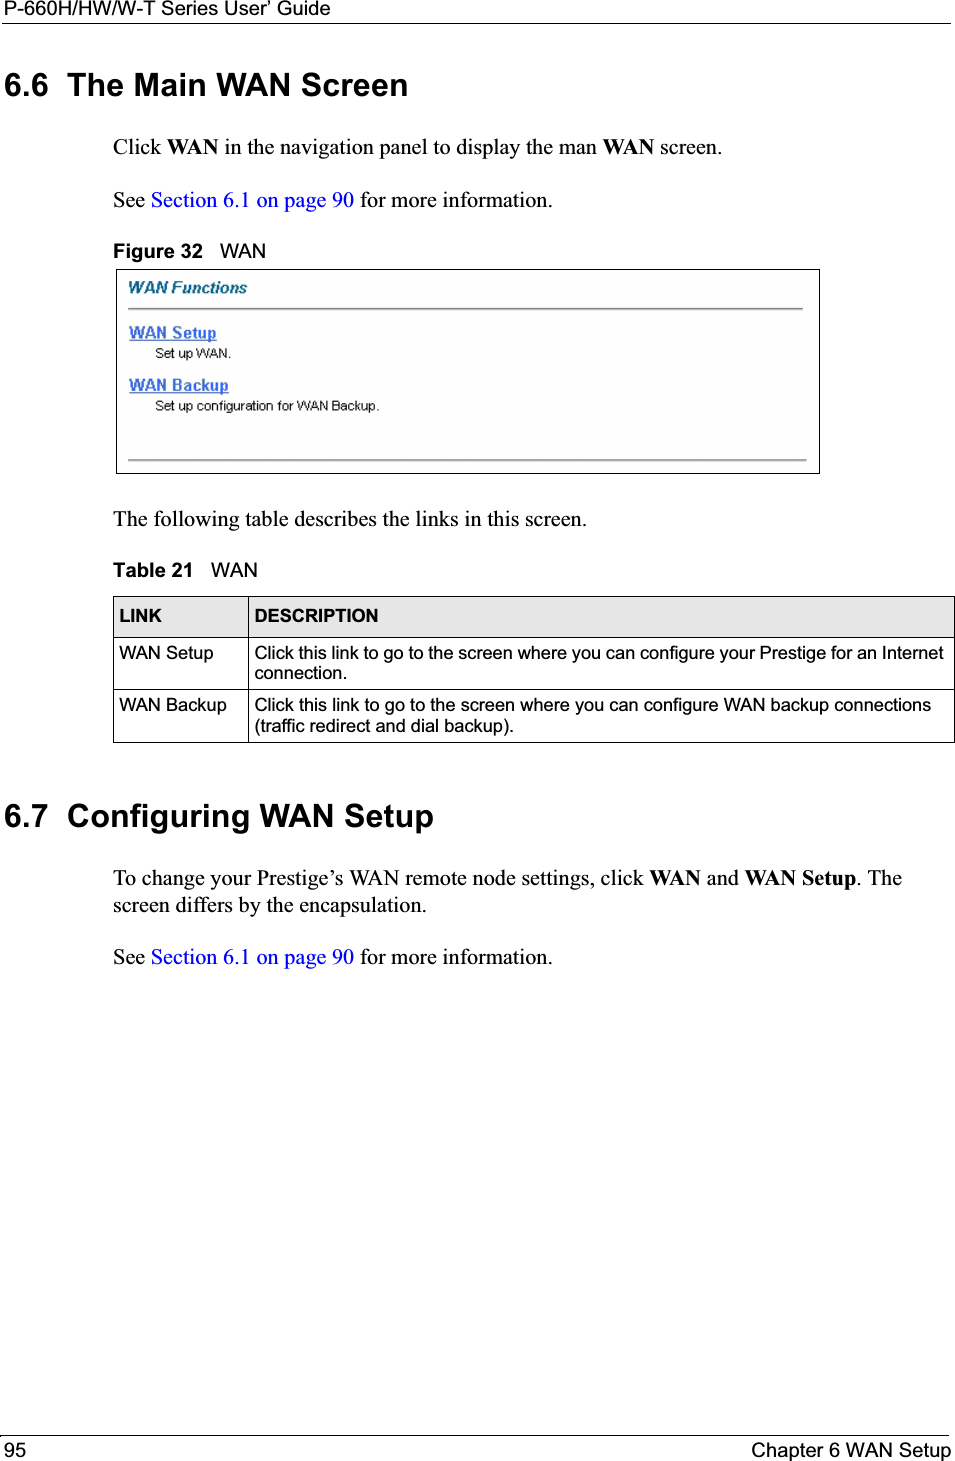 P-660H/HW/W-T Series User’ Guide95 Chapter 6 WAN Setup6.6  The Main WAN Screen Click WA N  in the navigation panel to display the man WAN screen. See Section 6.1 on page 90 for more information. Figure 32   WAN The following table describes the links in this screen. 6.7  Configuring WAN Setup To change your Prestige’s WAN remote node settings, click WA N  and WAN Setup. The screen differs by the encapsulation. See Section 6.1 on page 90 for more information. Table 21   WANLINK DESCRIPTIONWAN Setup Click this link to go to the screen where you can configure your Prestige for an Internet connection. WAN Backup Click this link to go to the screen where you can configure WAN backup connections (traffic redirect and dial backup).